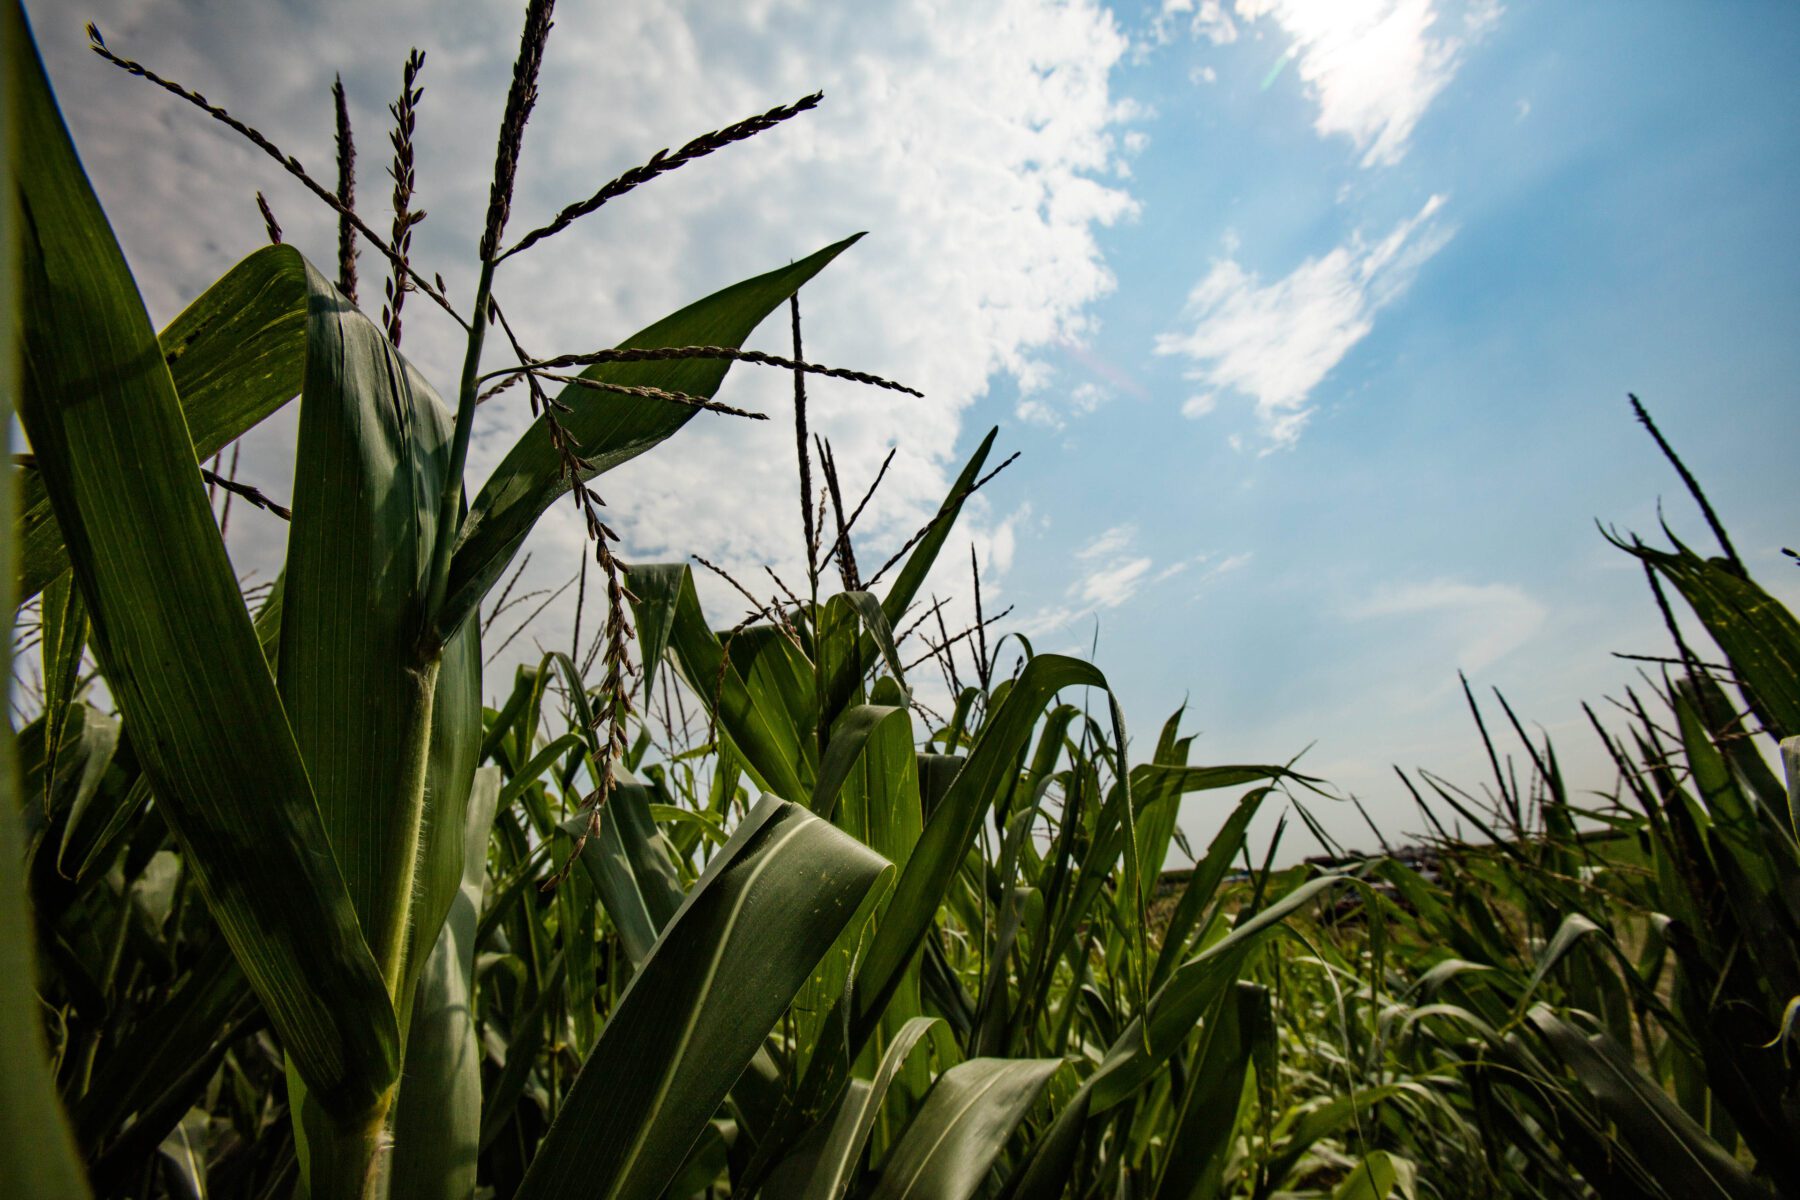 RIPE researchers have shown that by treating photosynthesis as a dynamic process, C4 plants like corn could improve their reaction to changes in light, improving overall yield. Image by Brian Stauffer?